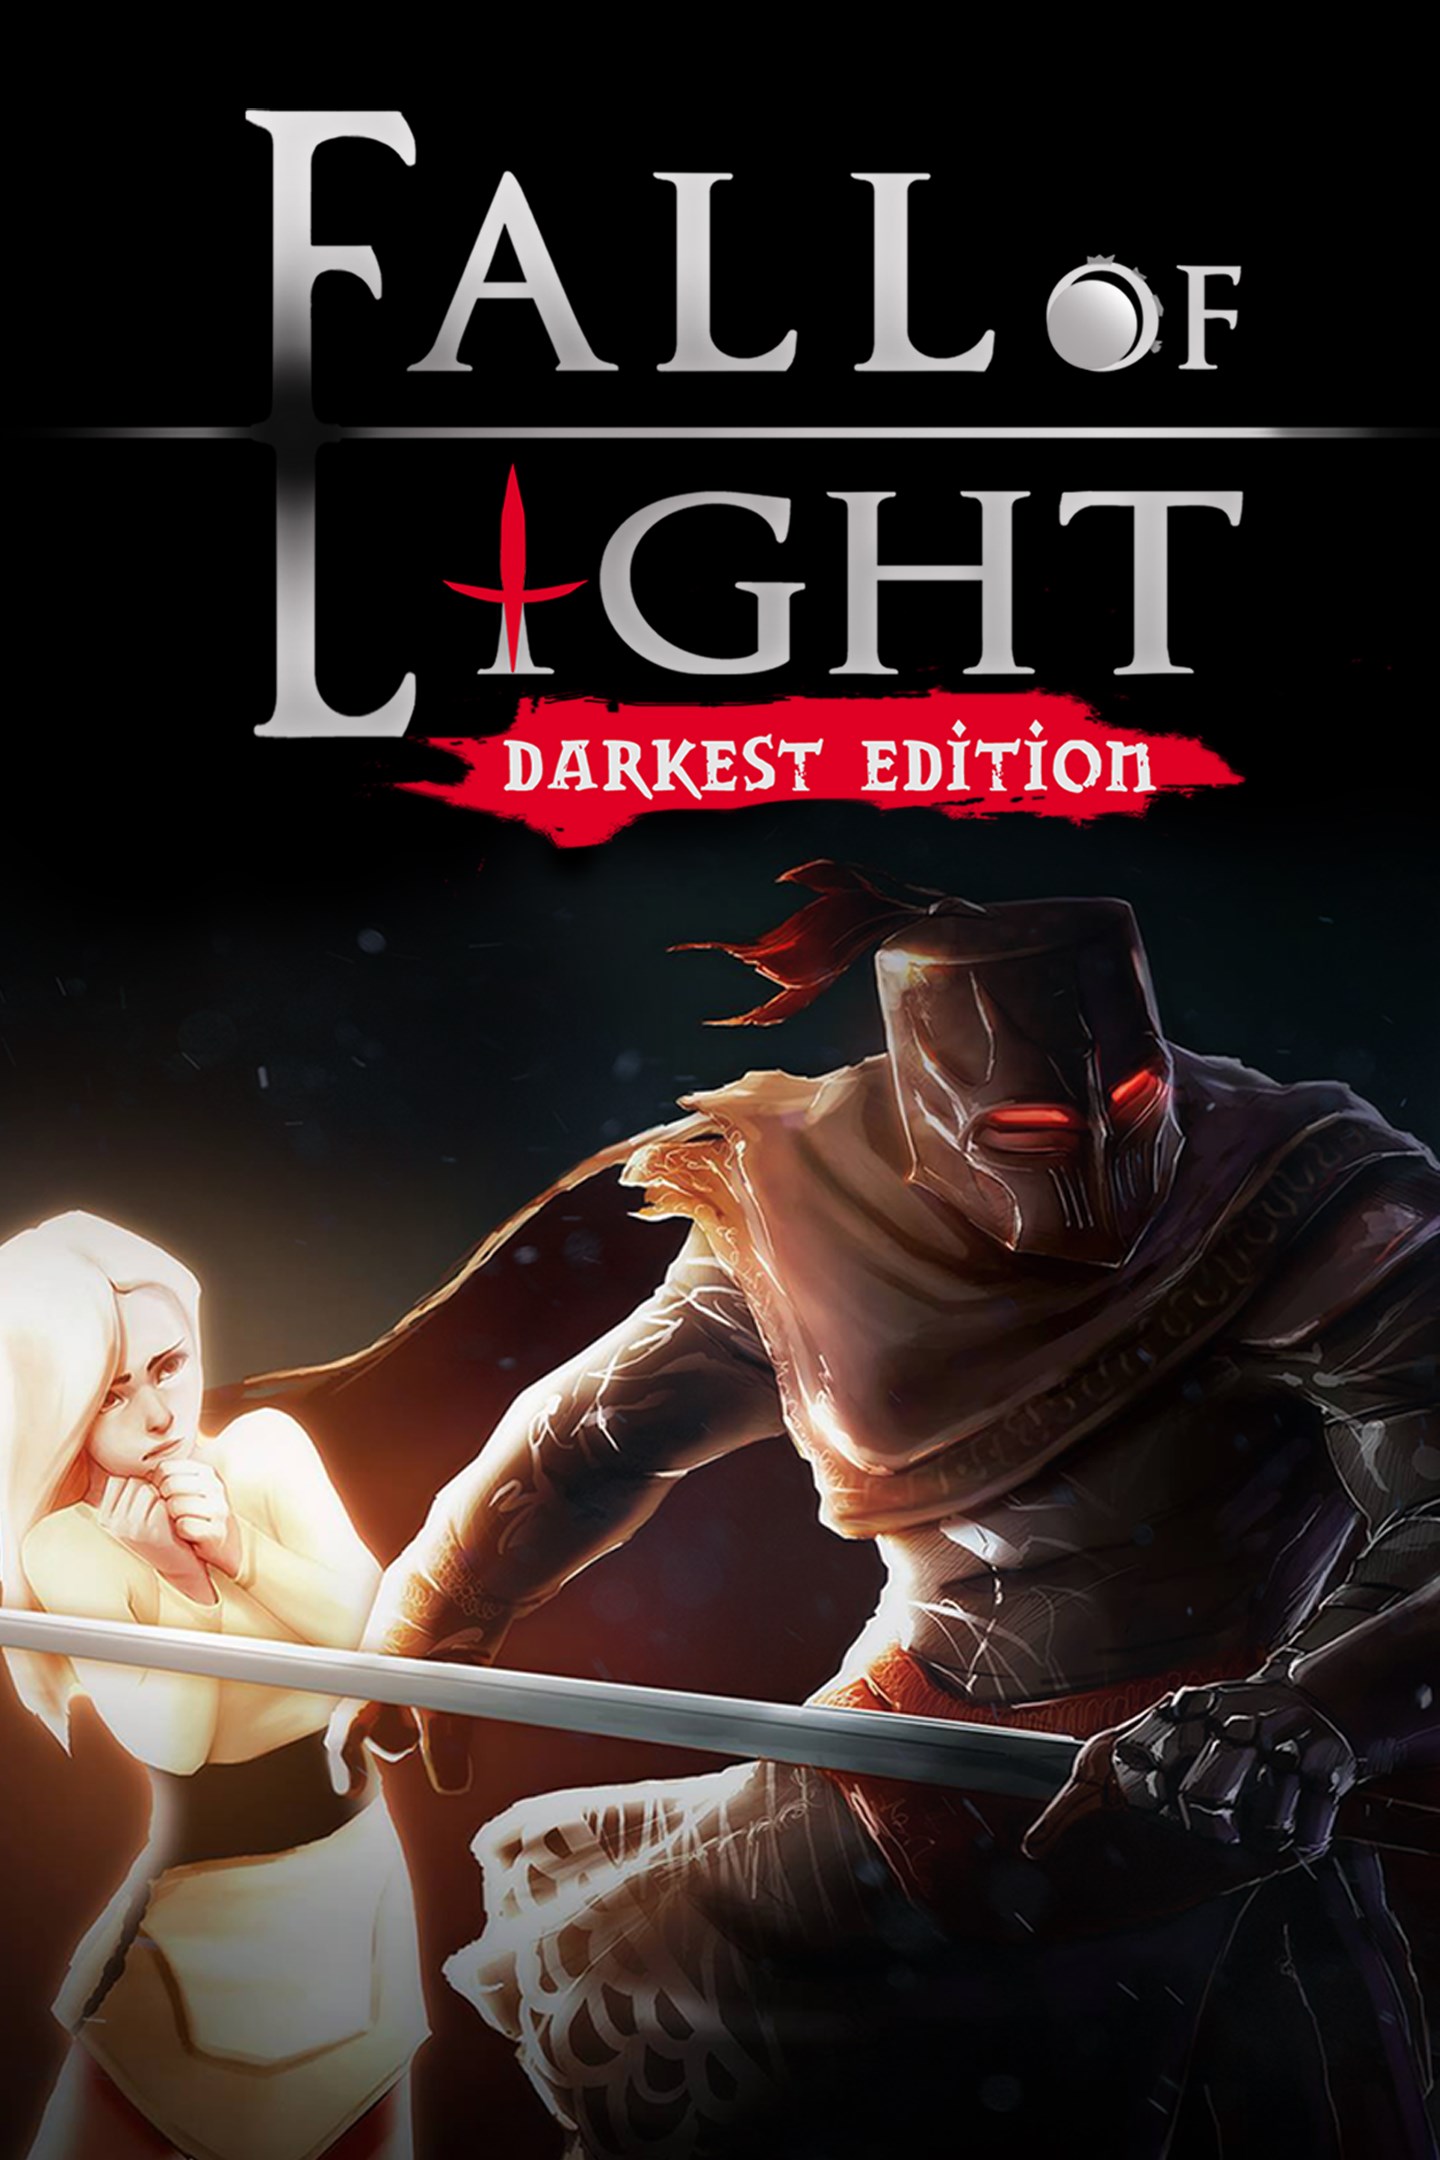 Download Fall of Light Darkest Edition for Xbox of Light Darkest Edition PC Download